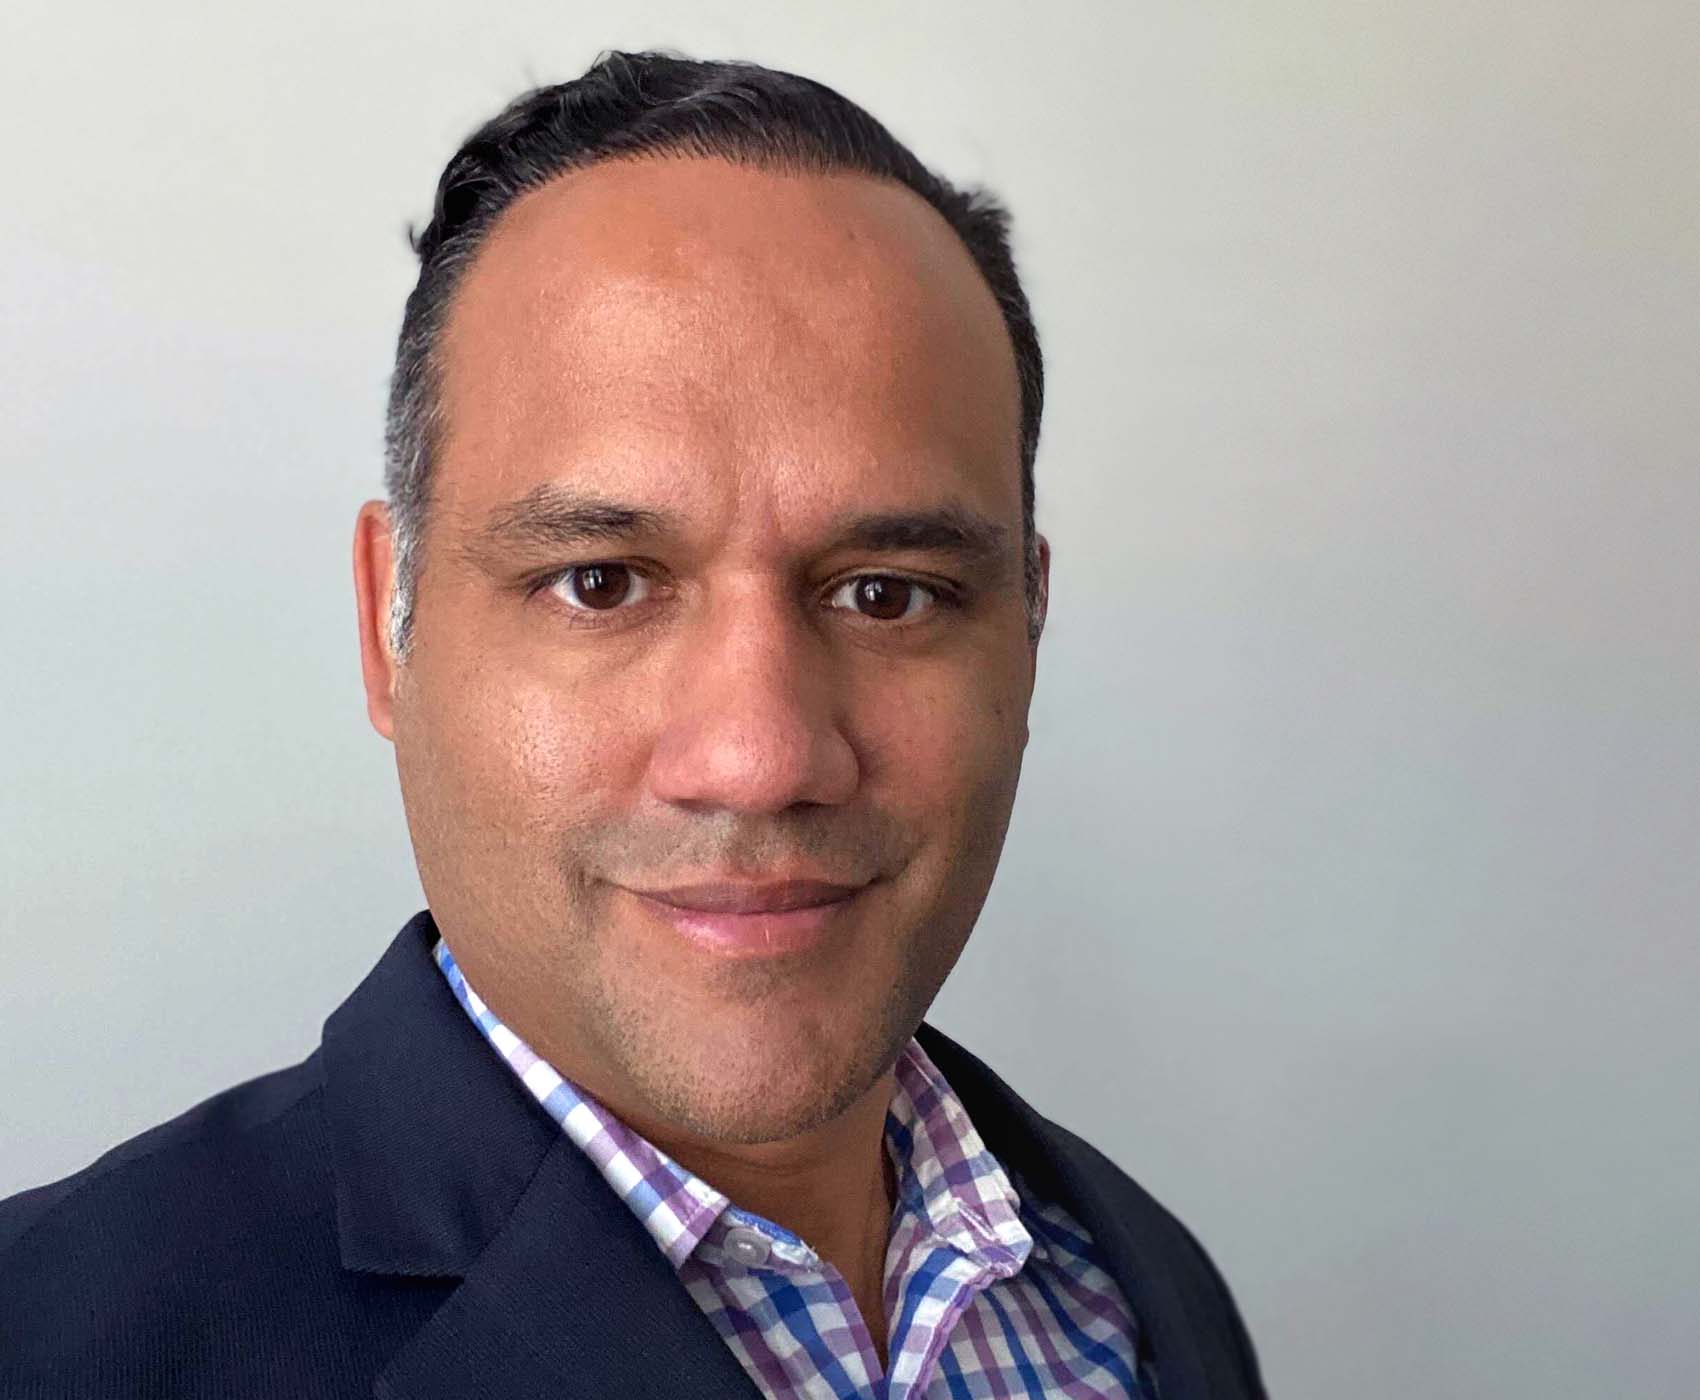 ThreatConnect VP of Engineering Danny Tineo